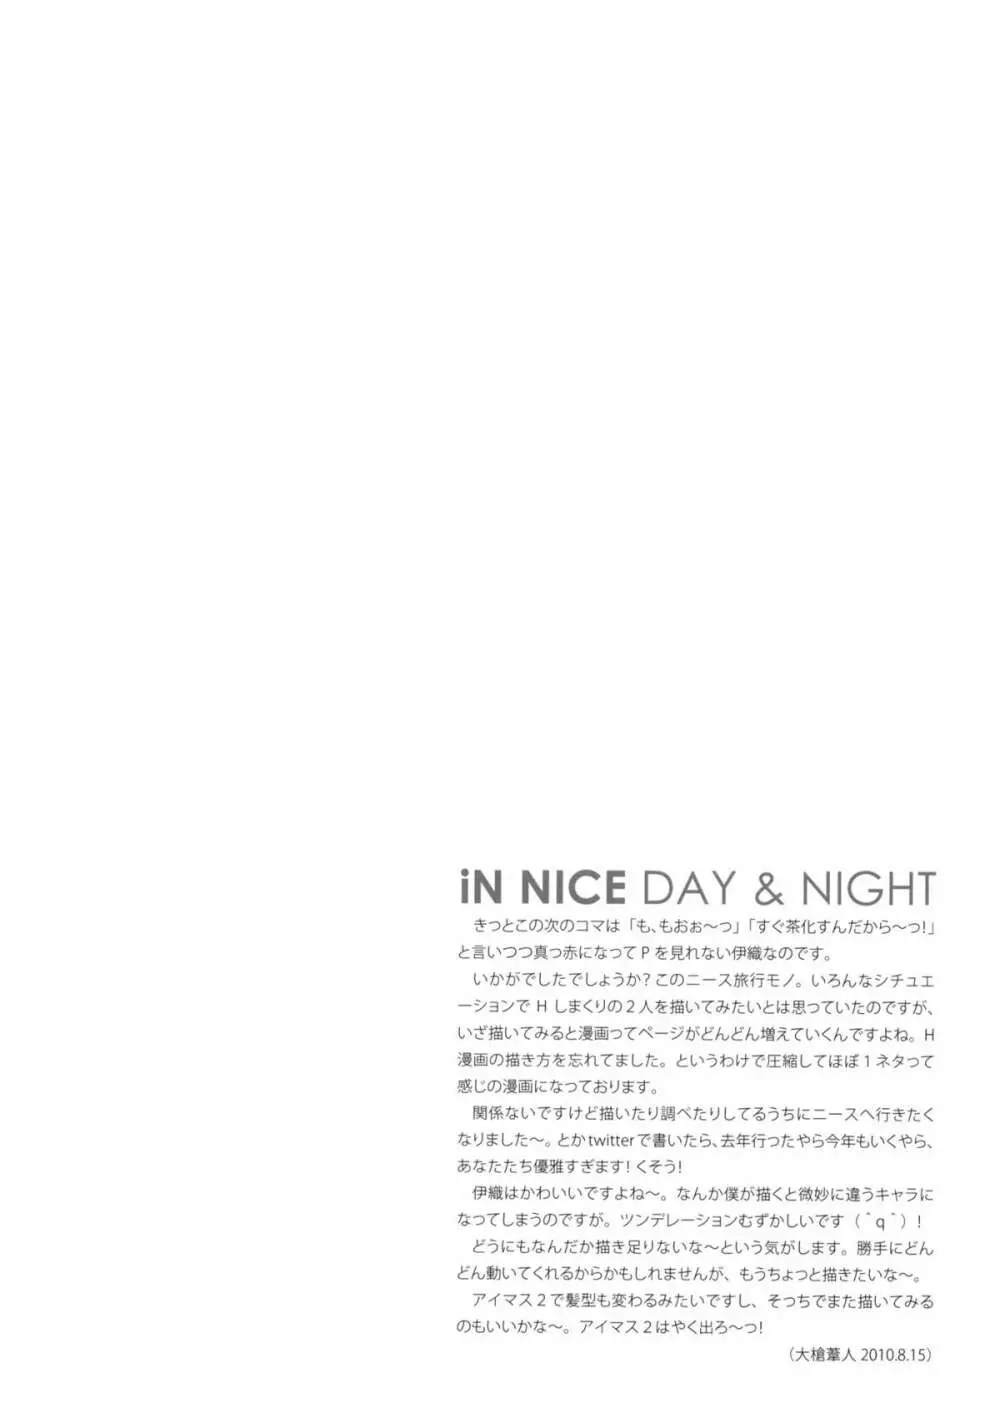 IDOLTIME SPECIAL BOOK IORI MINASE iN NICE DAY&NIGHT 29ページ